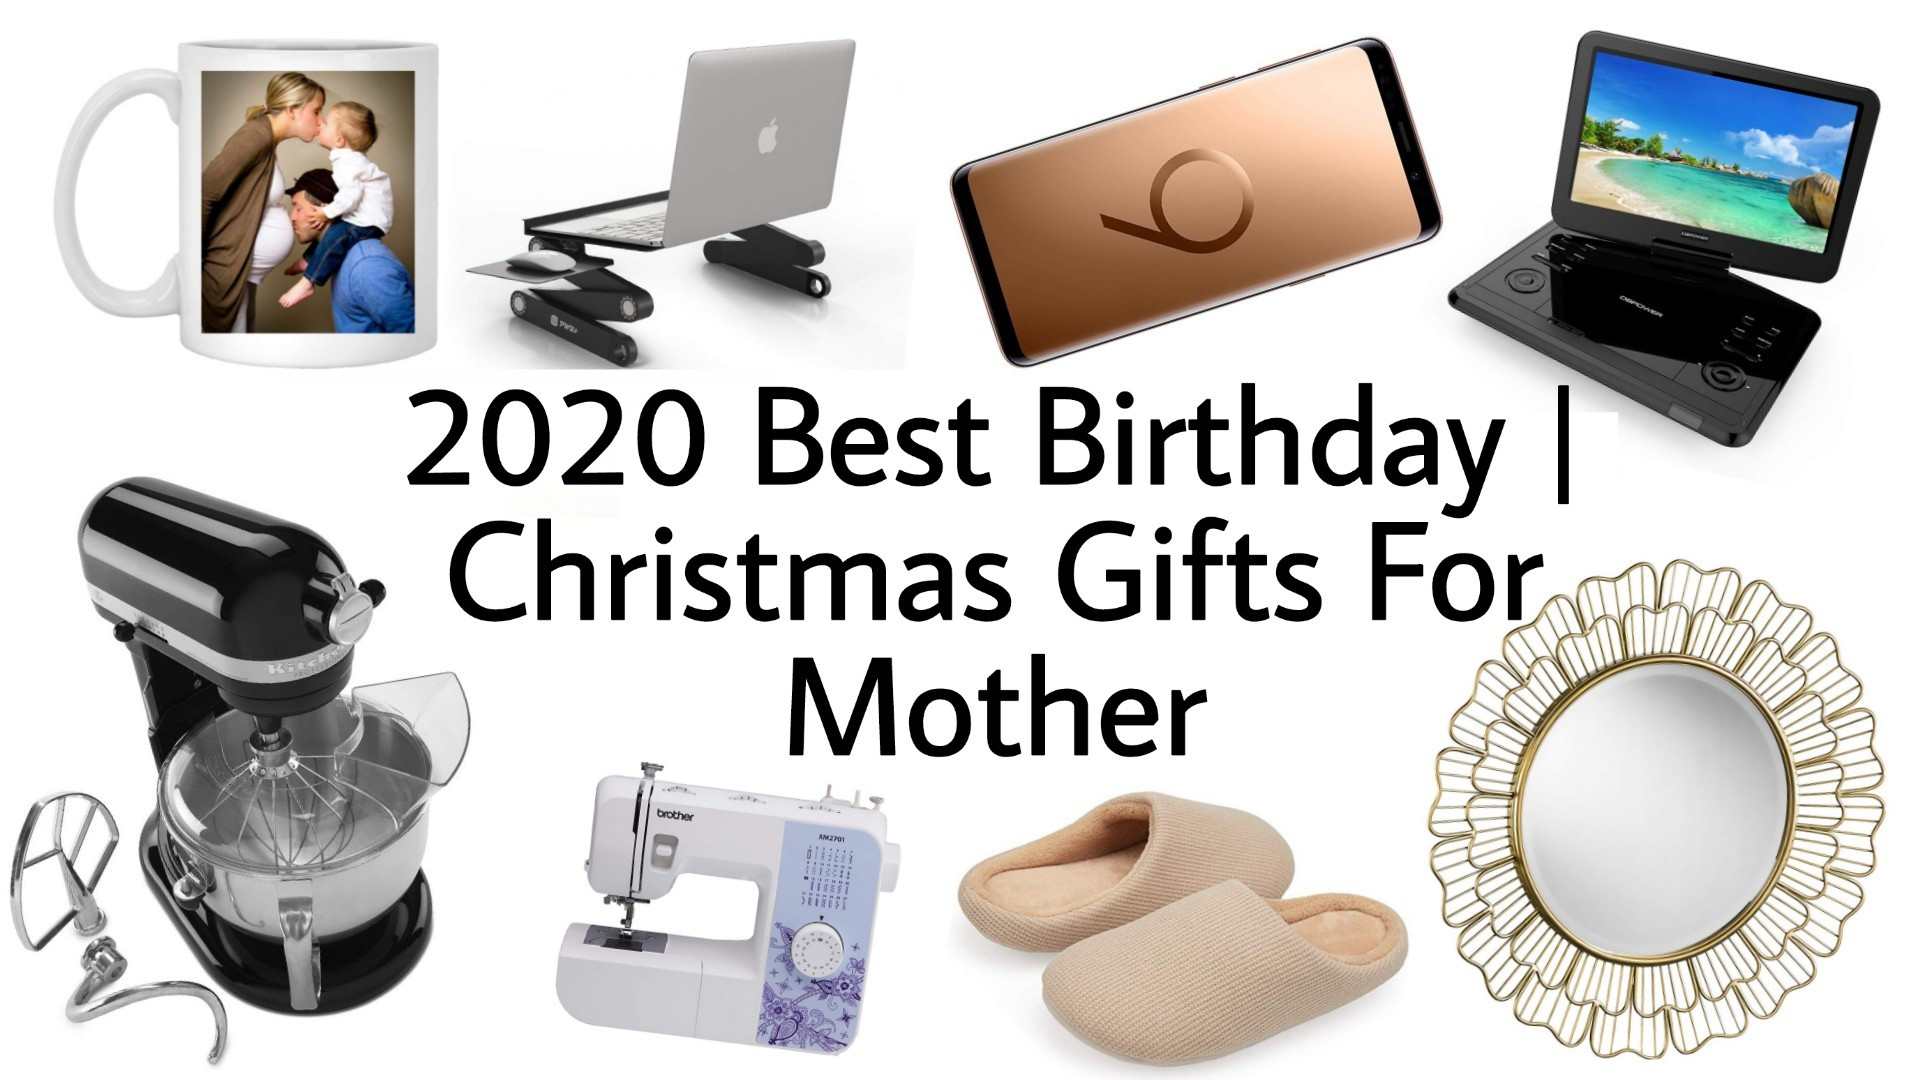 Gift Ideas Christmas 2020
 2020 Best Christmas Gifts for Mom